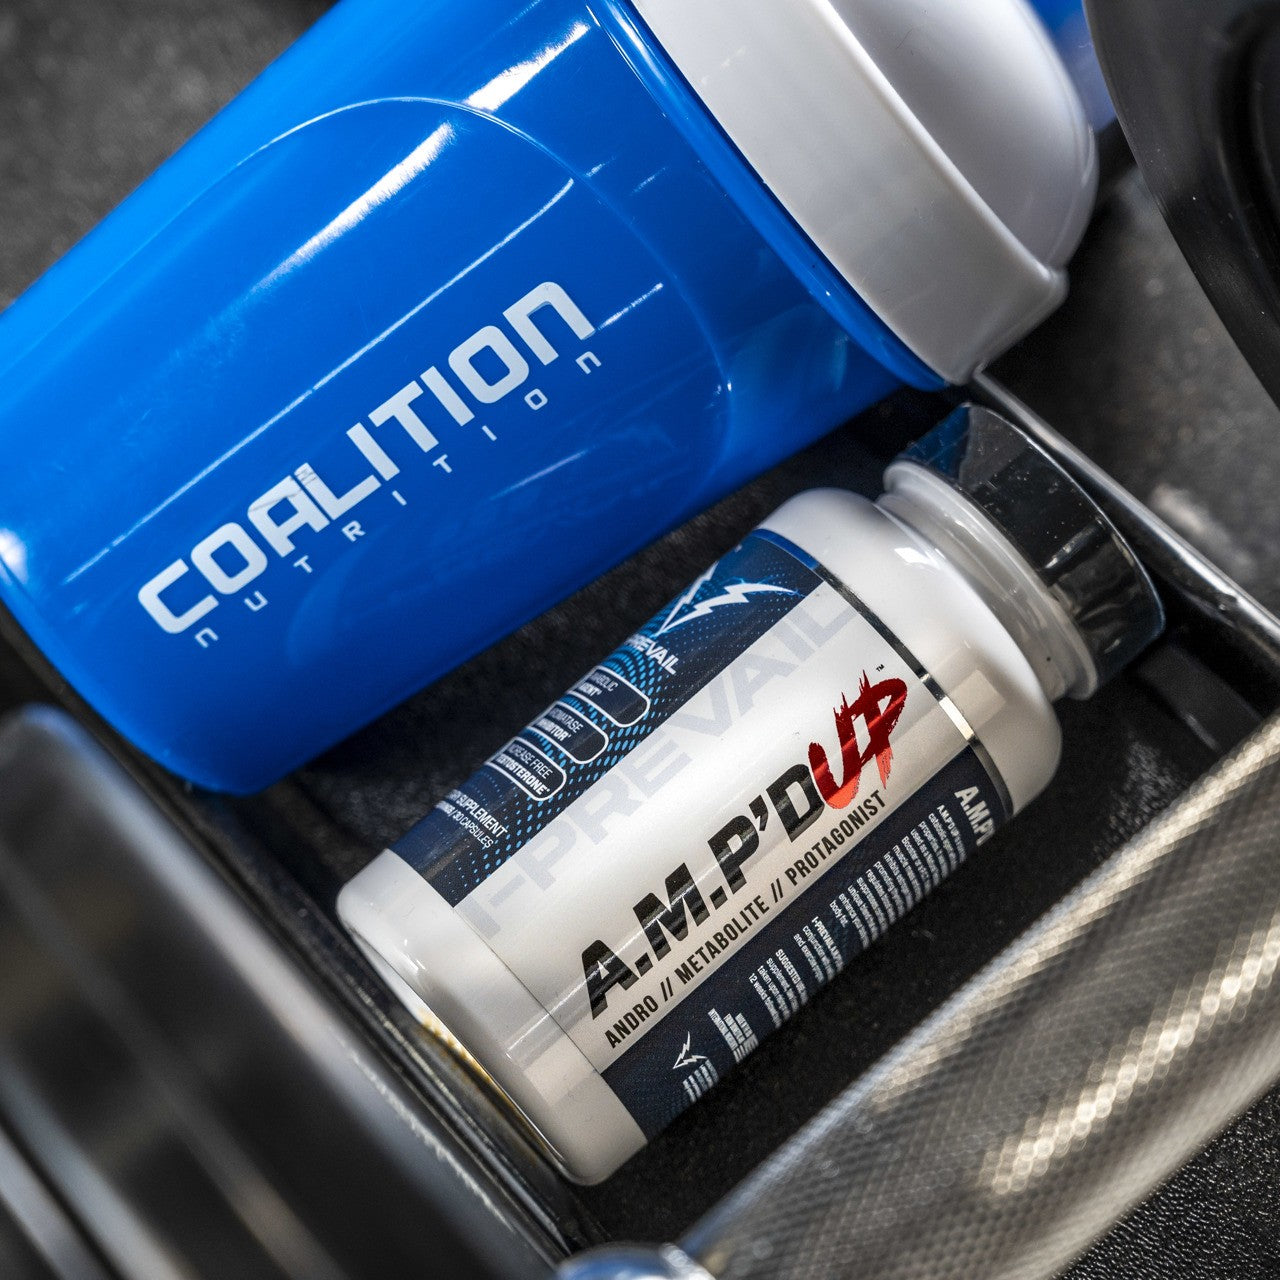 I-Prevail Supplements Amp'd Up Coalition Nutrition